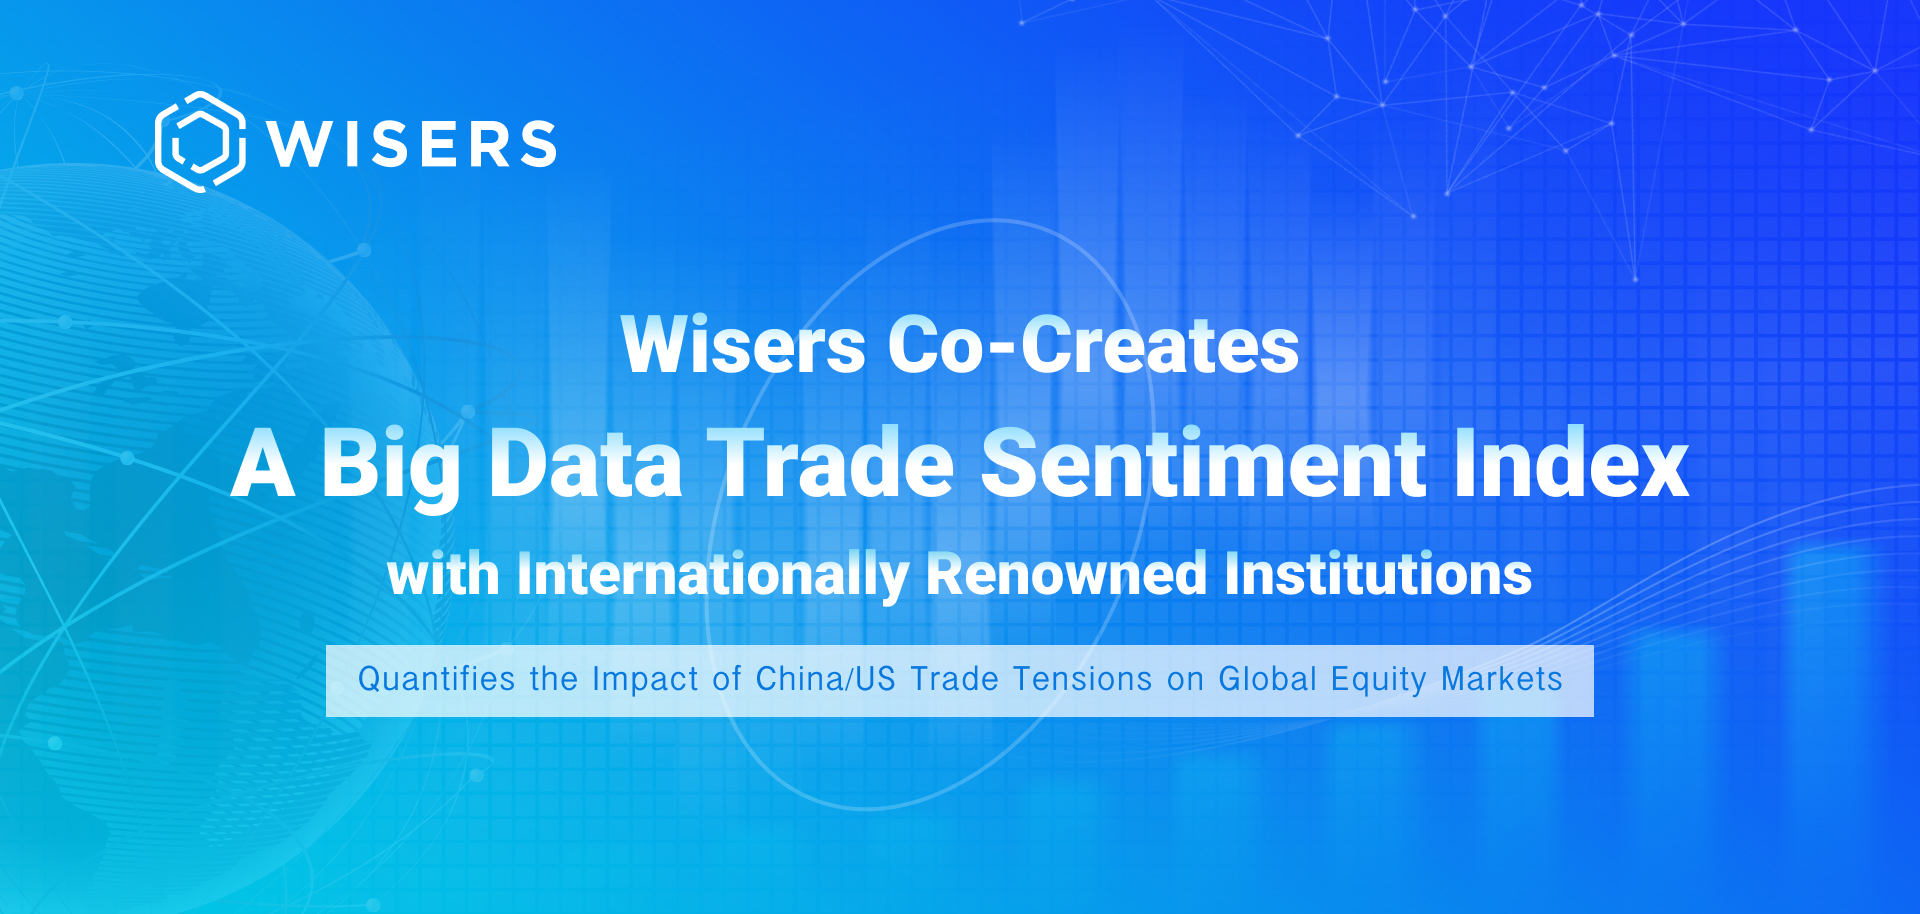 Wisers Co-Creates A Big Data Trade Sentiment Index That Quantifies the Impact of China/US Trade Situations on Global Equity Markets